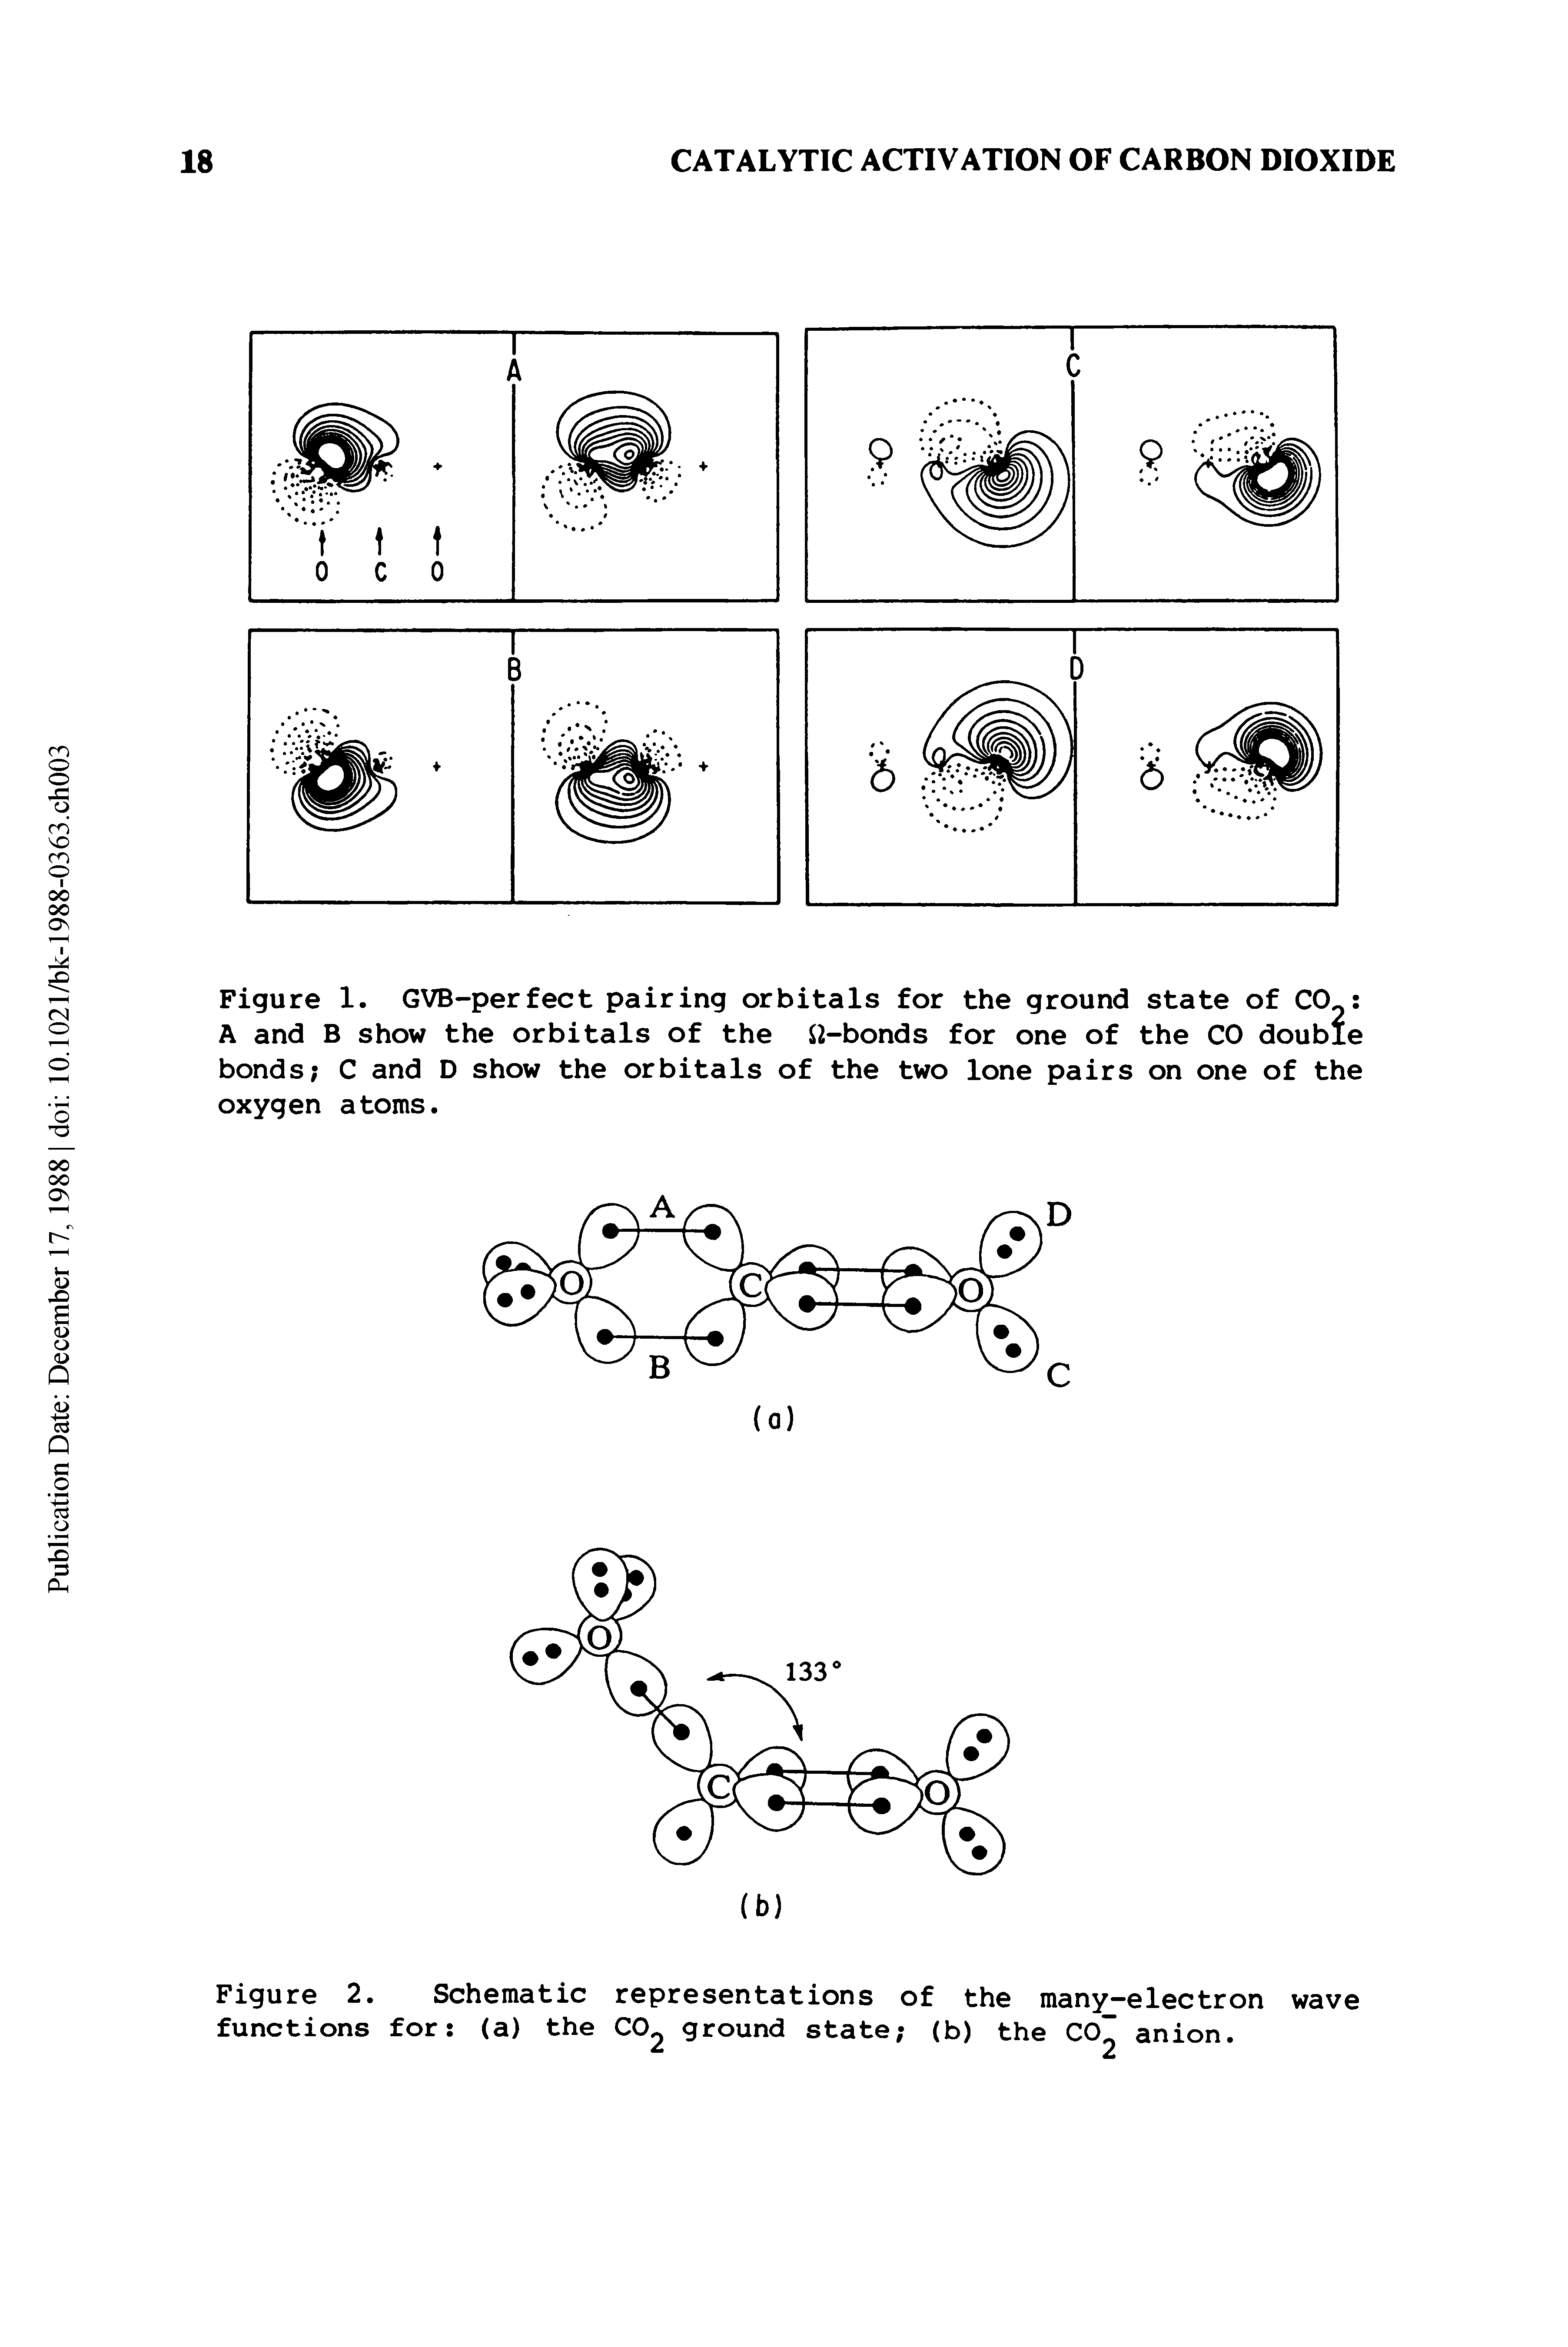 Figure 1. GVB-perfect pairing orbitals for the ground state of CO A and B show the orbitals of the 12-bonds for one of the CO double bonds C and D show the orbitals of the two lone pairs on one of the oxygen atoms.